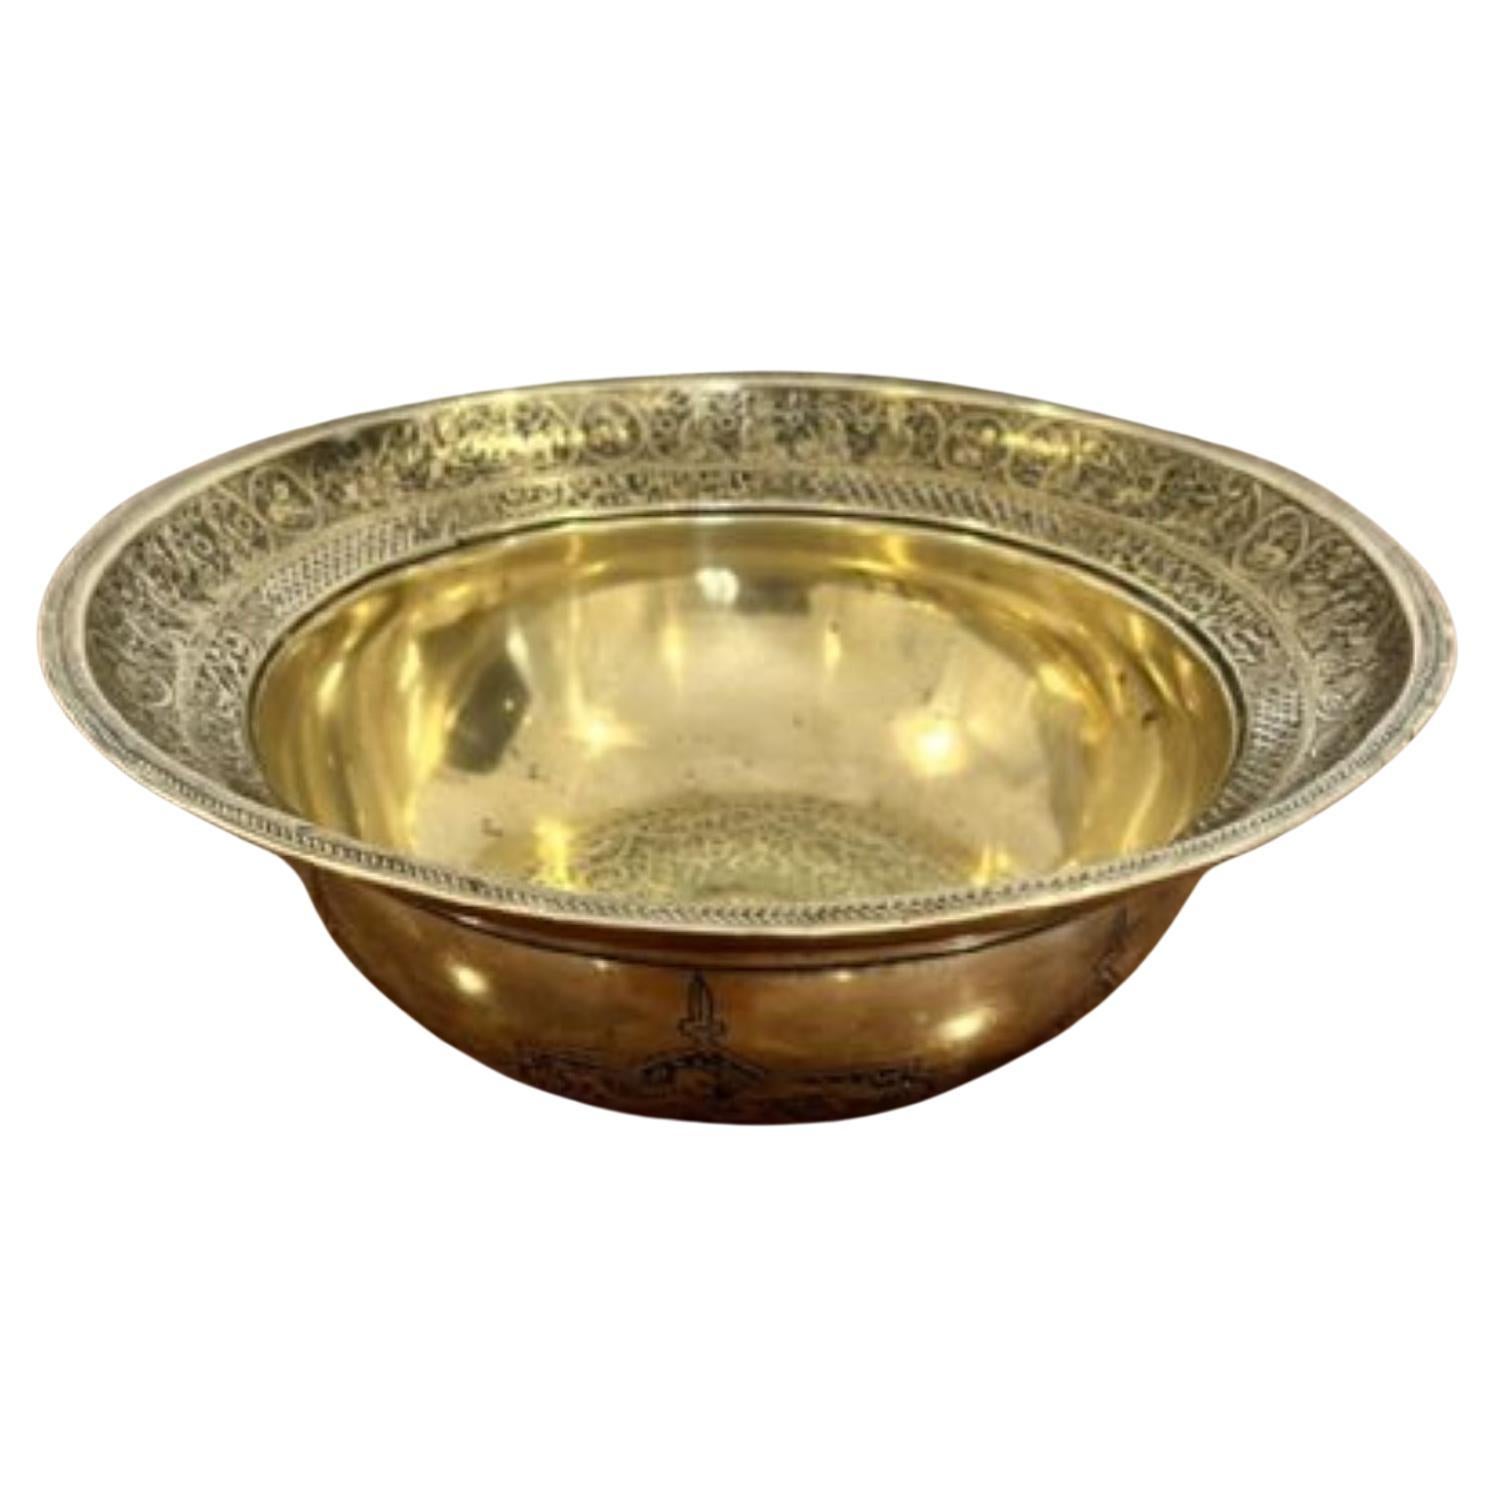 Impressive antique Victorian circular cairoware brass and mixed metal bowl For Sale